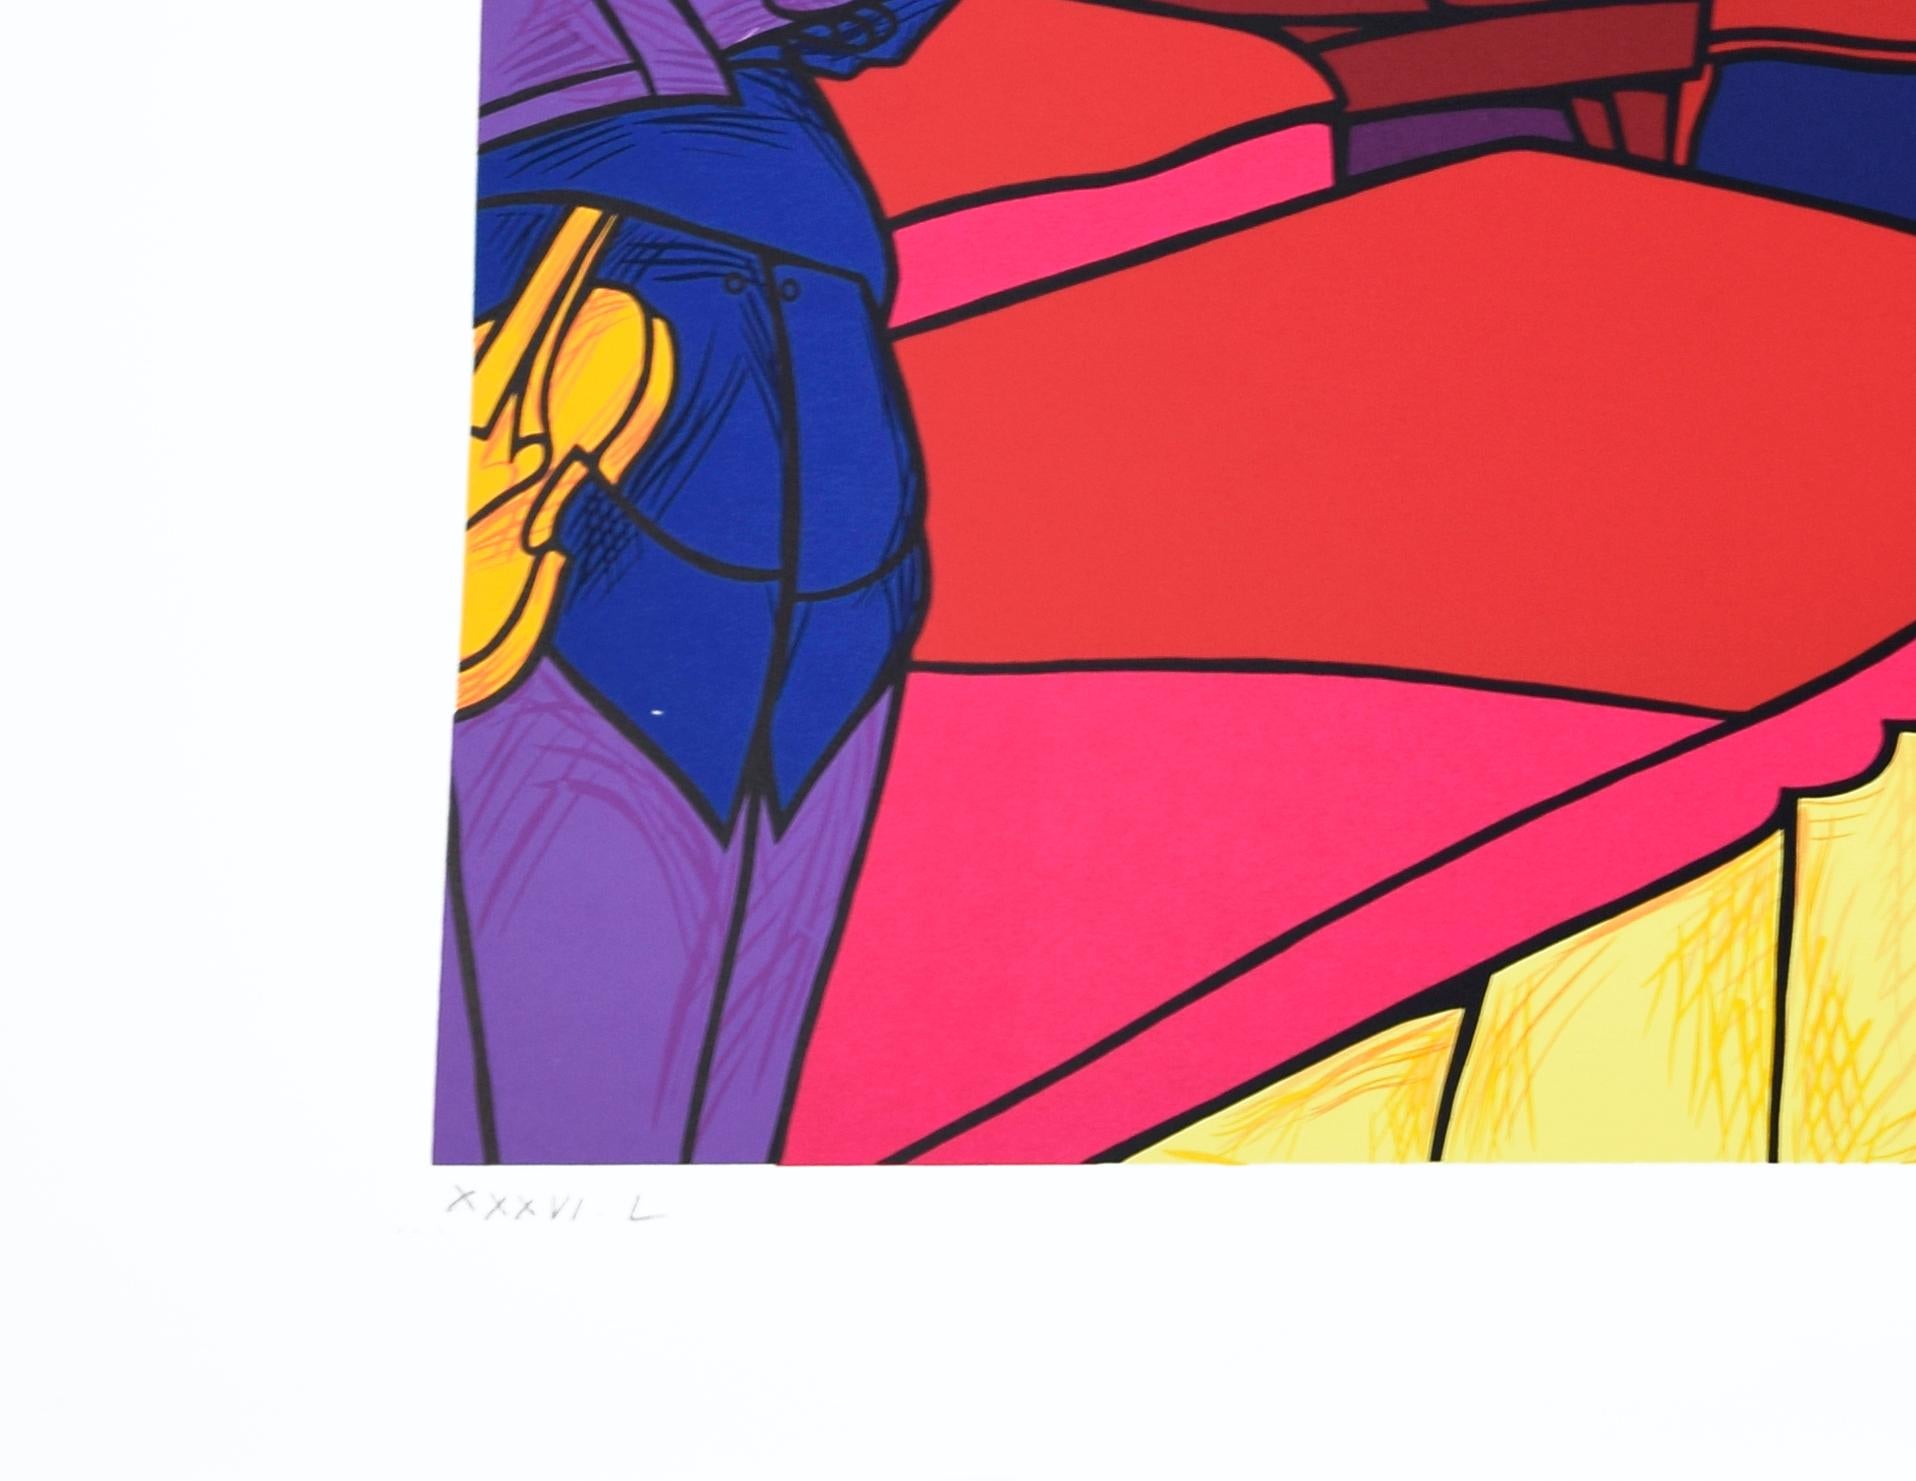 The Room is a colorful artwork realized by Valerio Adami in 1996.

Serigraph on paper. Hand-signed and numbered on the lower margin. Edition IX of L prints.

Dimensions: cm 70 x 90. In very good conditions. 

Original serigraph representing a